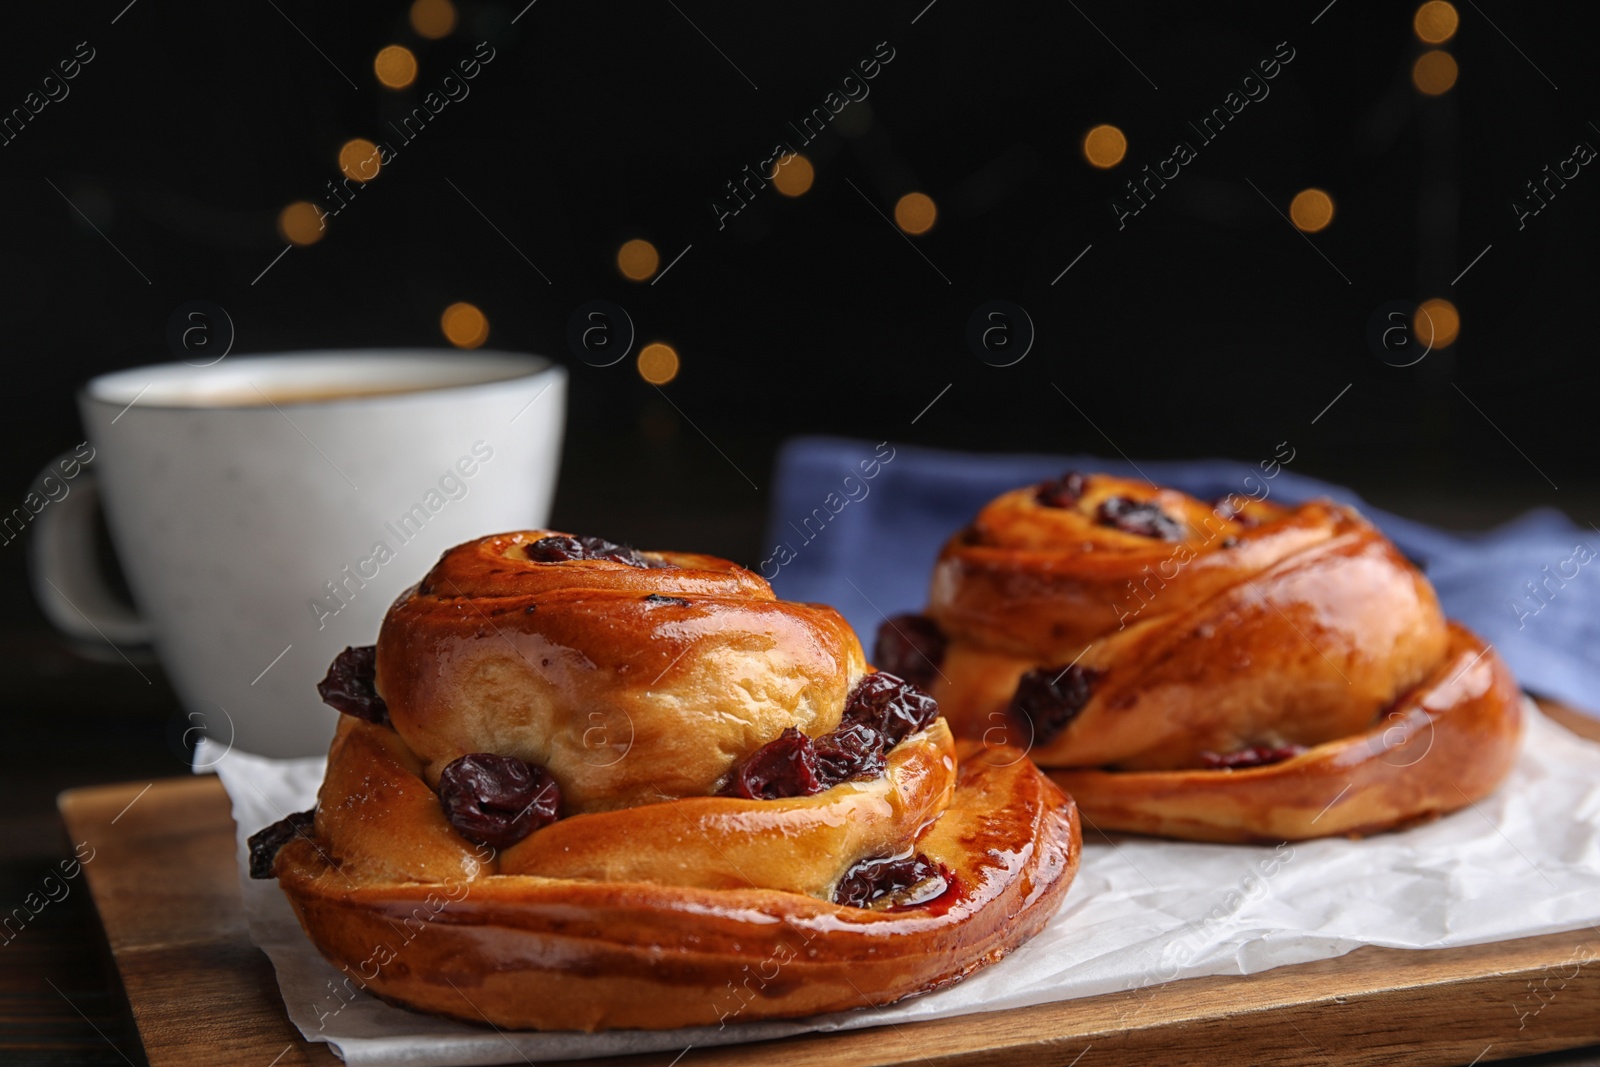 Photo of Delicious pastries and coffee on wooden table